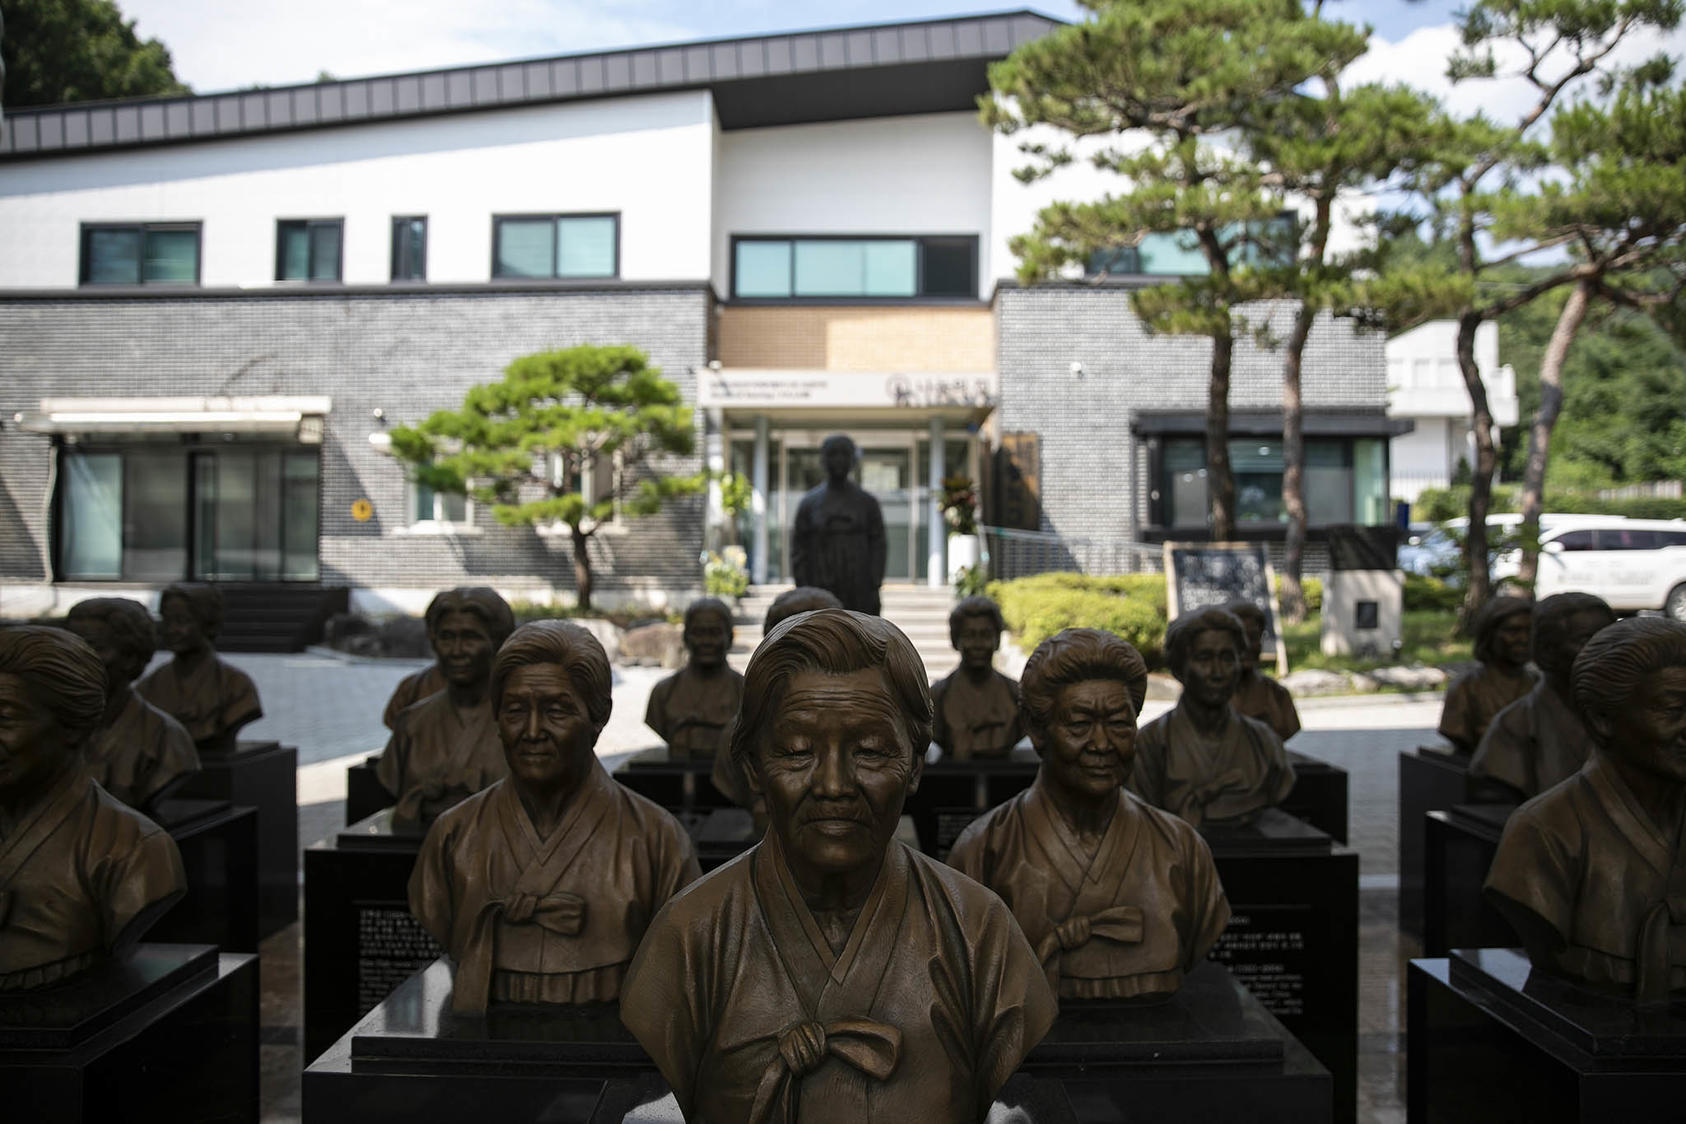 Bronze busts of former sex slaves, or “comfort women,” for Japanese troops in World War II, at the House of Sharing shelter in Gwangju, South Korea. July 3, 2022. (Woohae Cho/The New York Times)